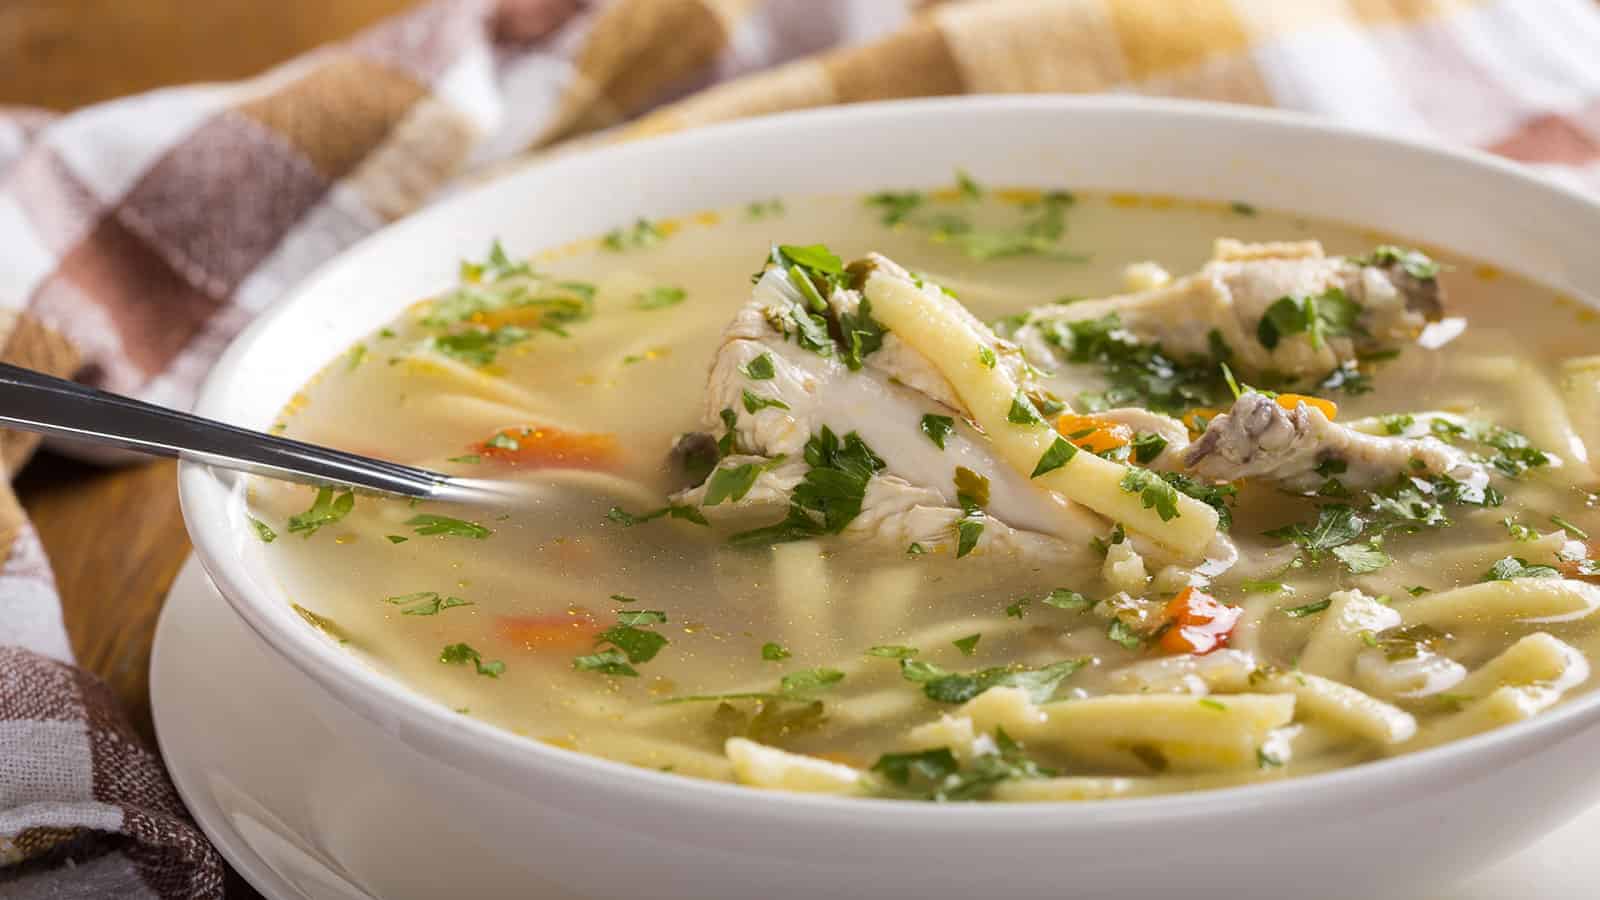 This Chicken Noodle Soup Recipe May Be The Best Ever (And 1 Million People Agree)